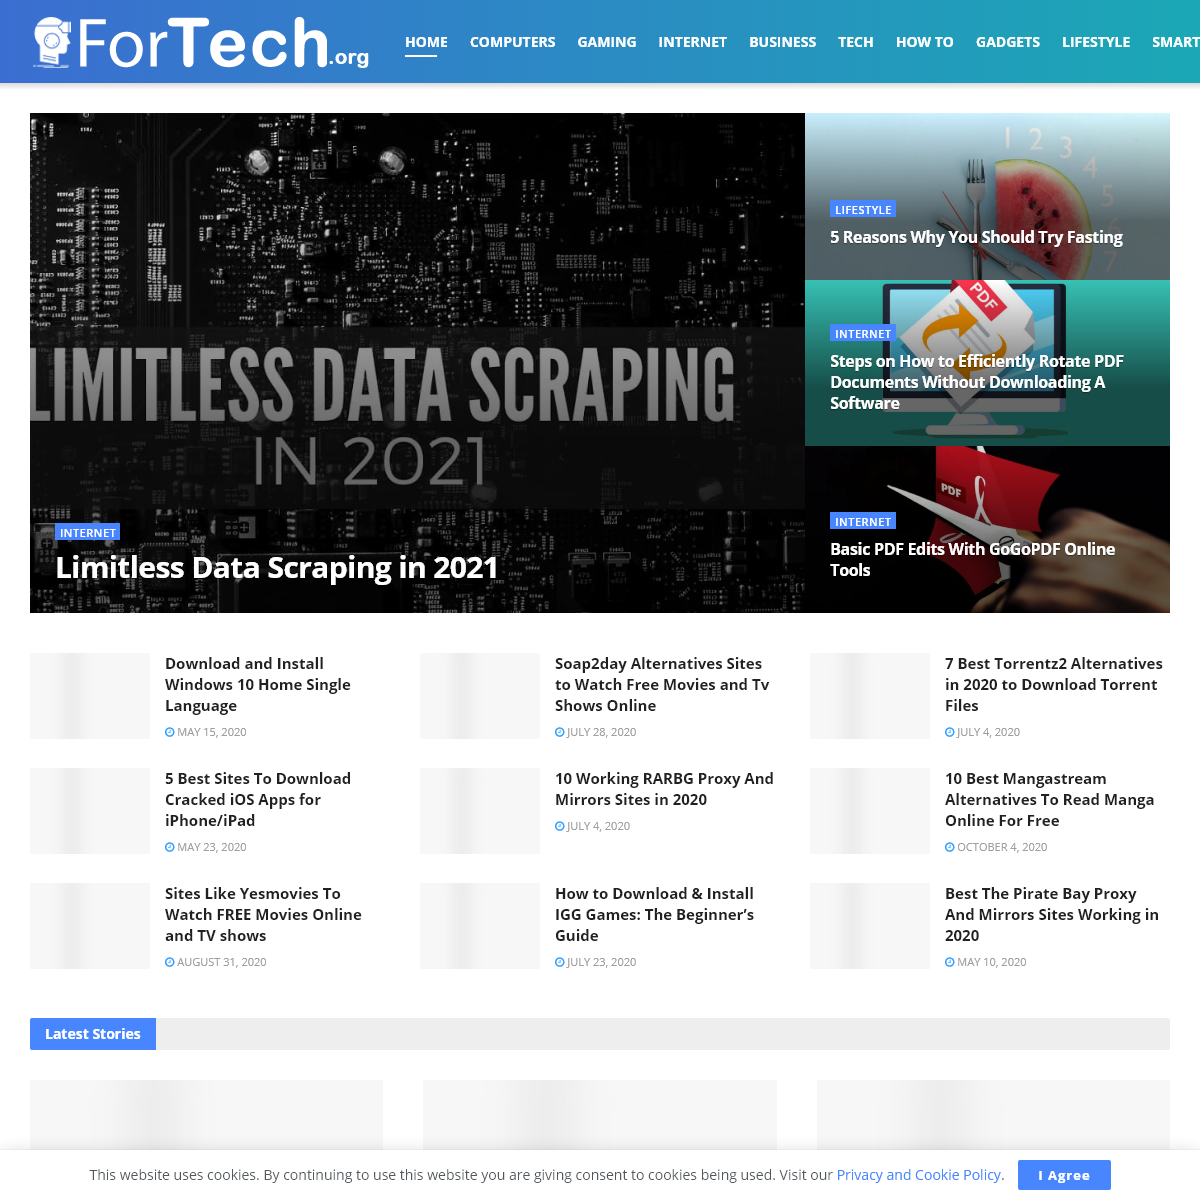 A complete backup of fortech.org